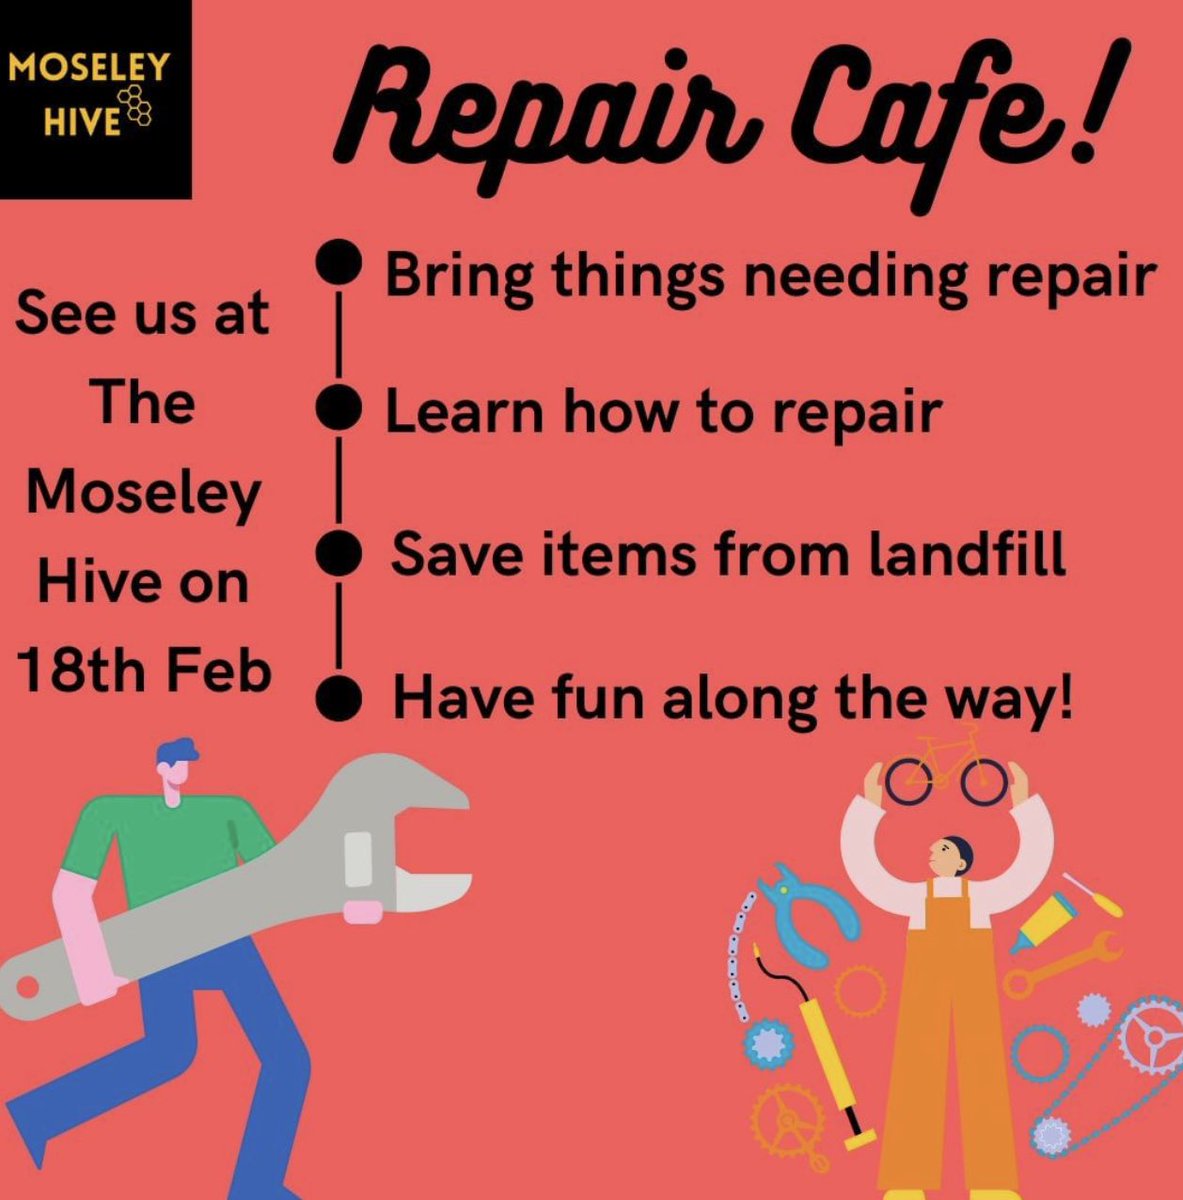 📣 1-3pm Moseley Hive Repair Cafe A bike that needs a small fix? Radio that’s not working? Trousers with a hole? Bring along your items that need repair and see one of our repairers. They’ll work with you to see if we can fix the item and save things from landfill. #Moseley